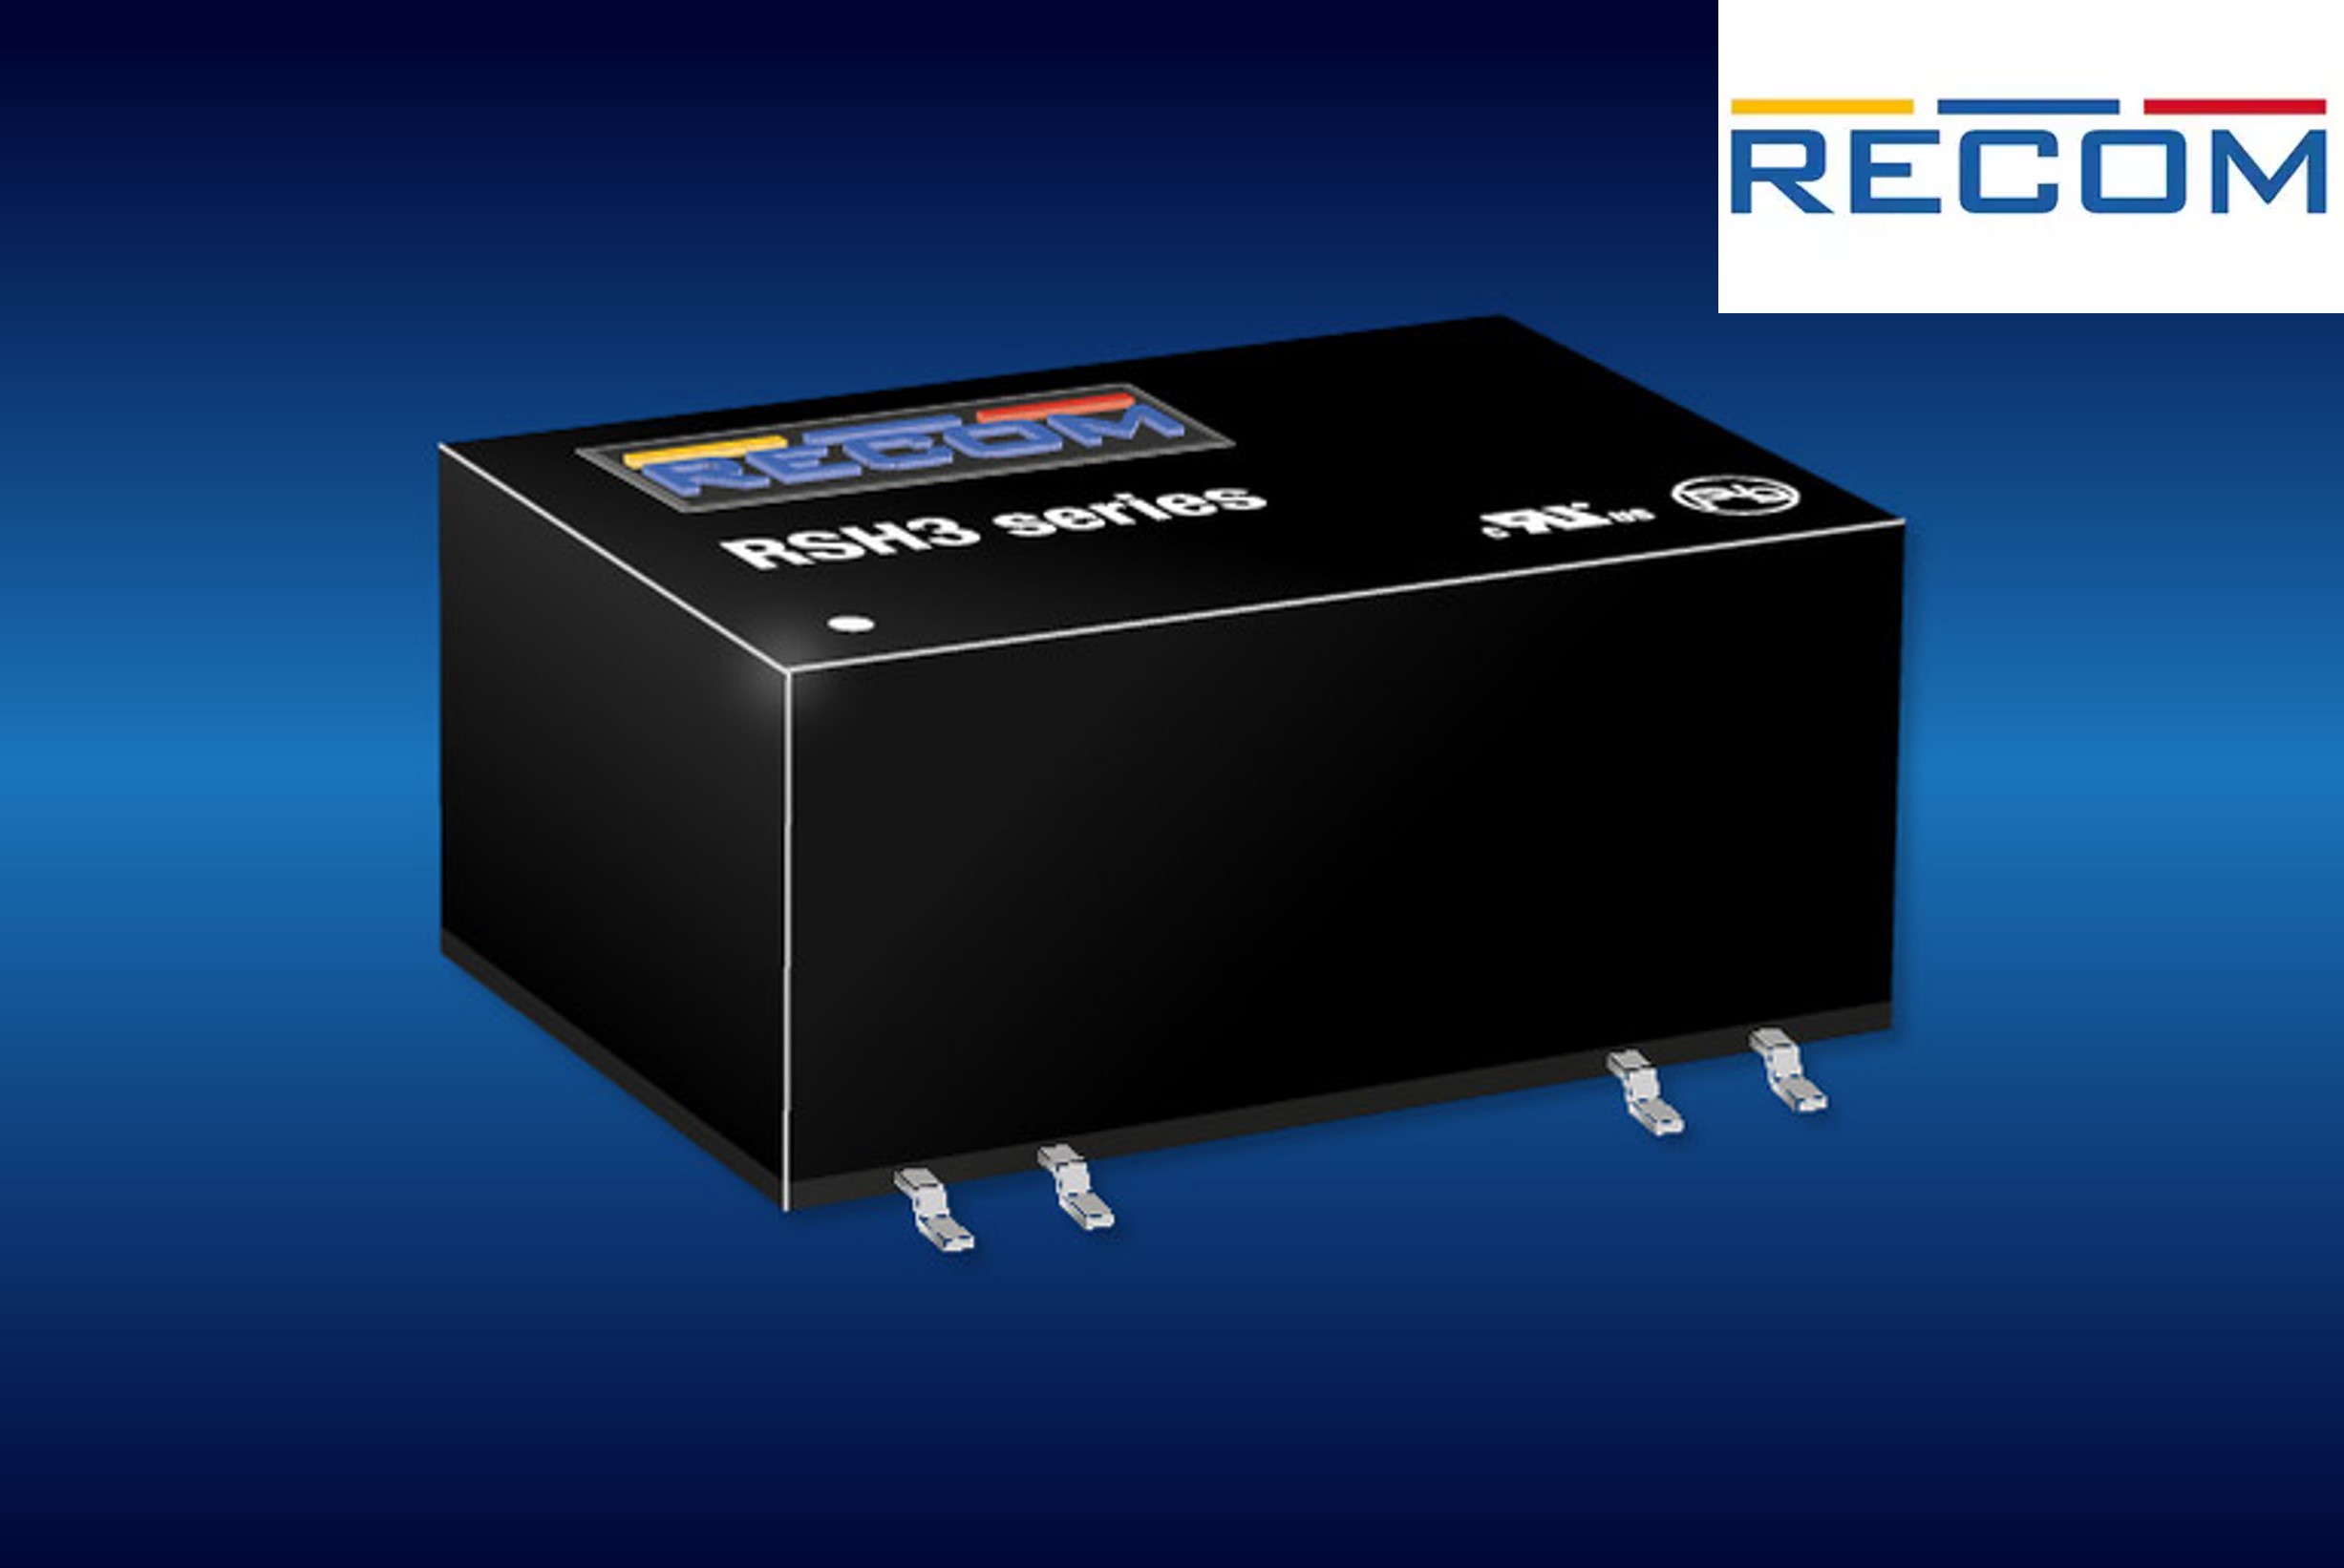 RECOM DC/DC converter range extended to 3W